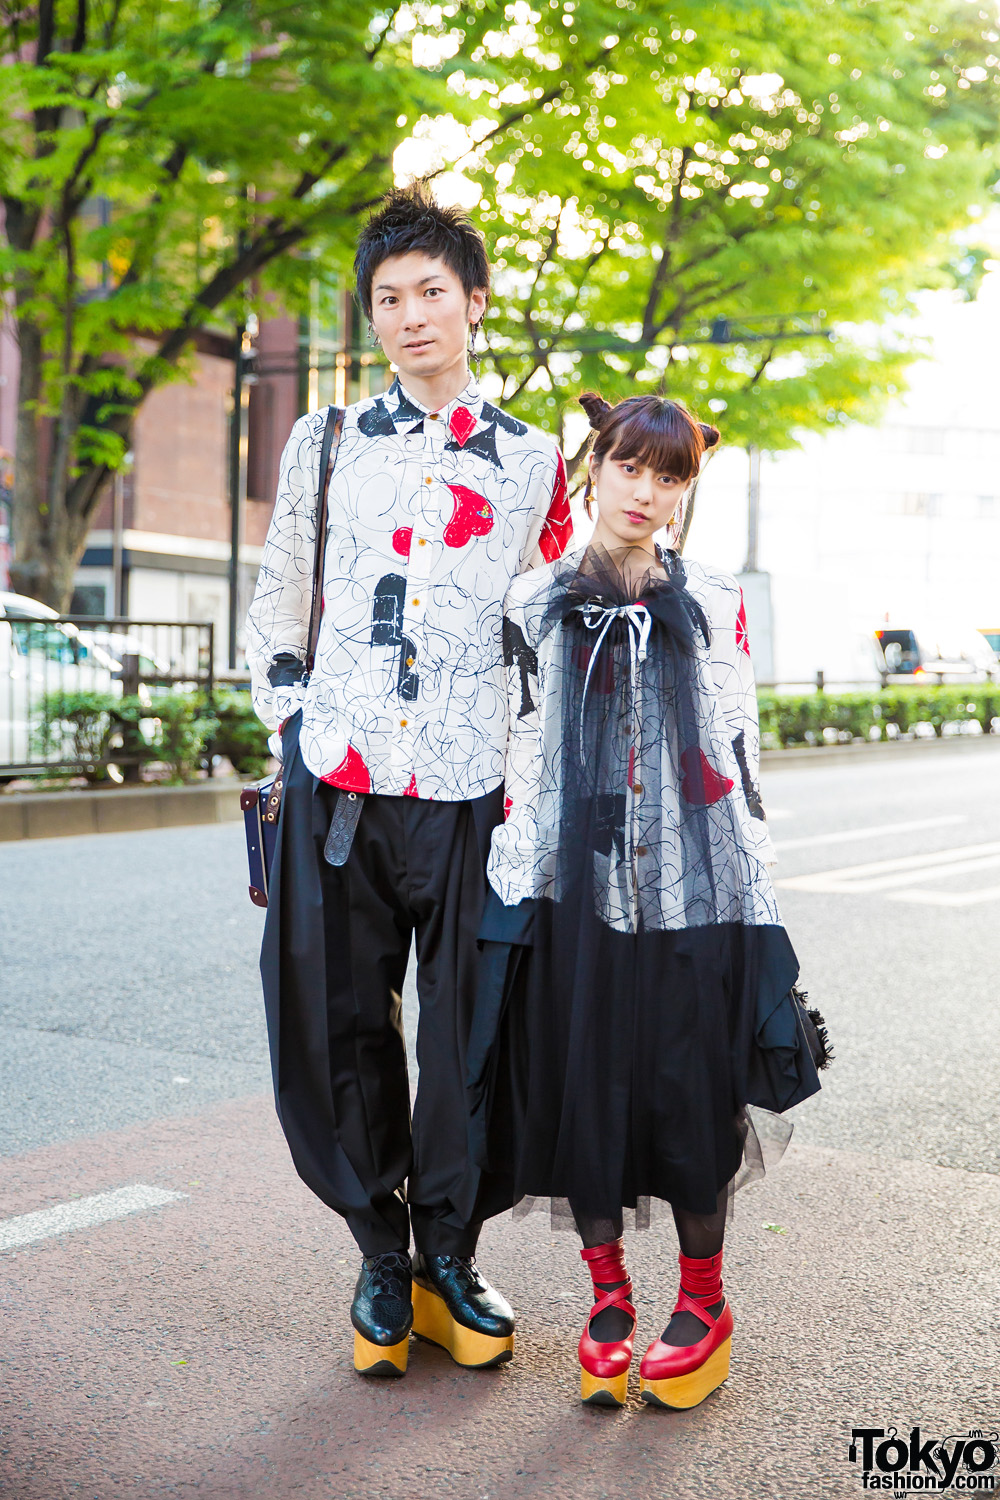 Harajuku Duo in Matching Vivienne Westwood Printed Outfits & Rocking Horse Shoes